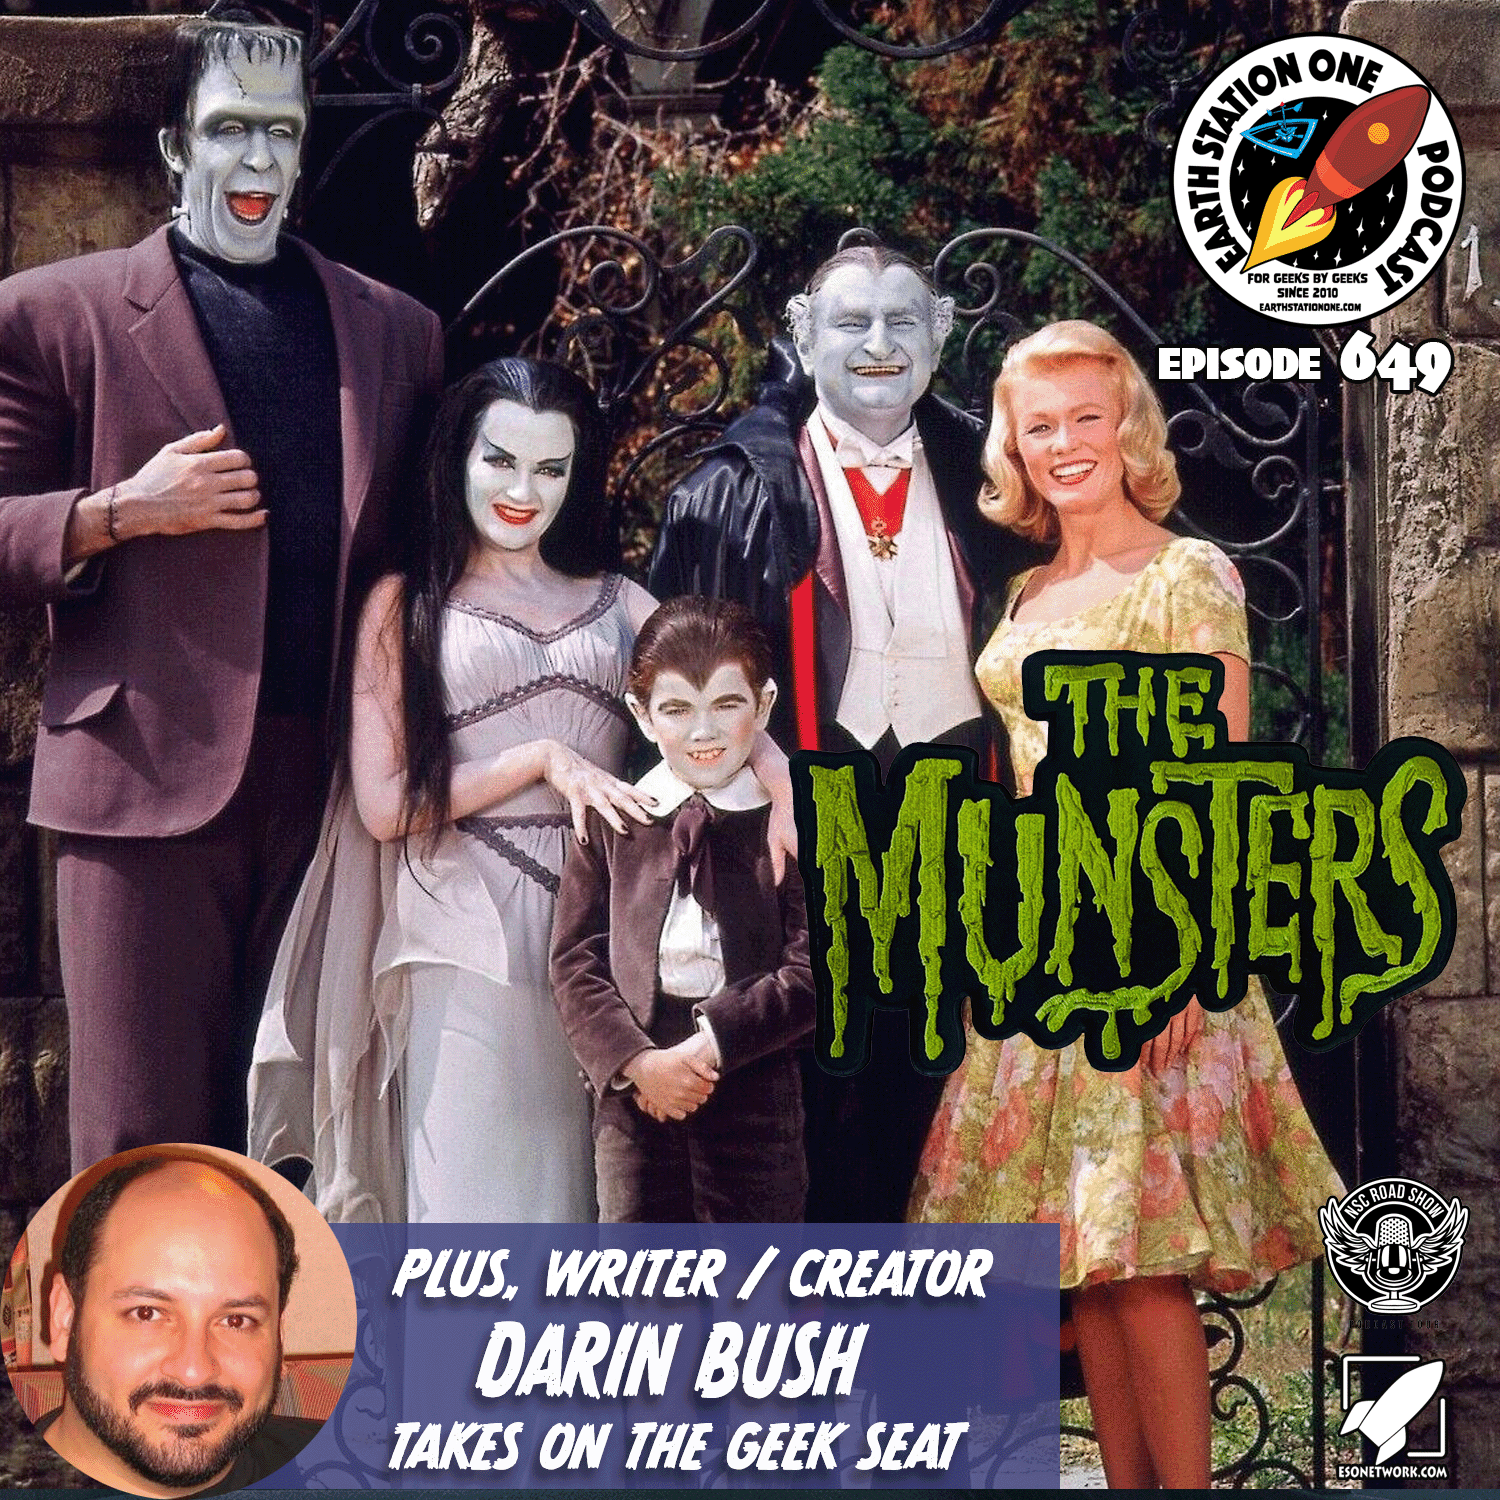 Earth Station One Ep 649 - Spotlight on The Munsters